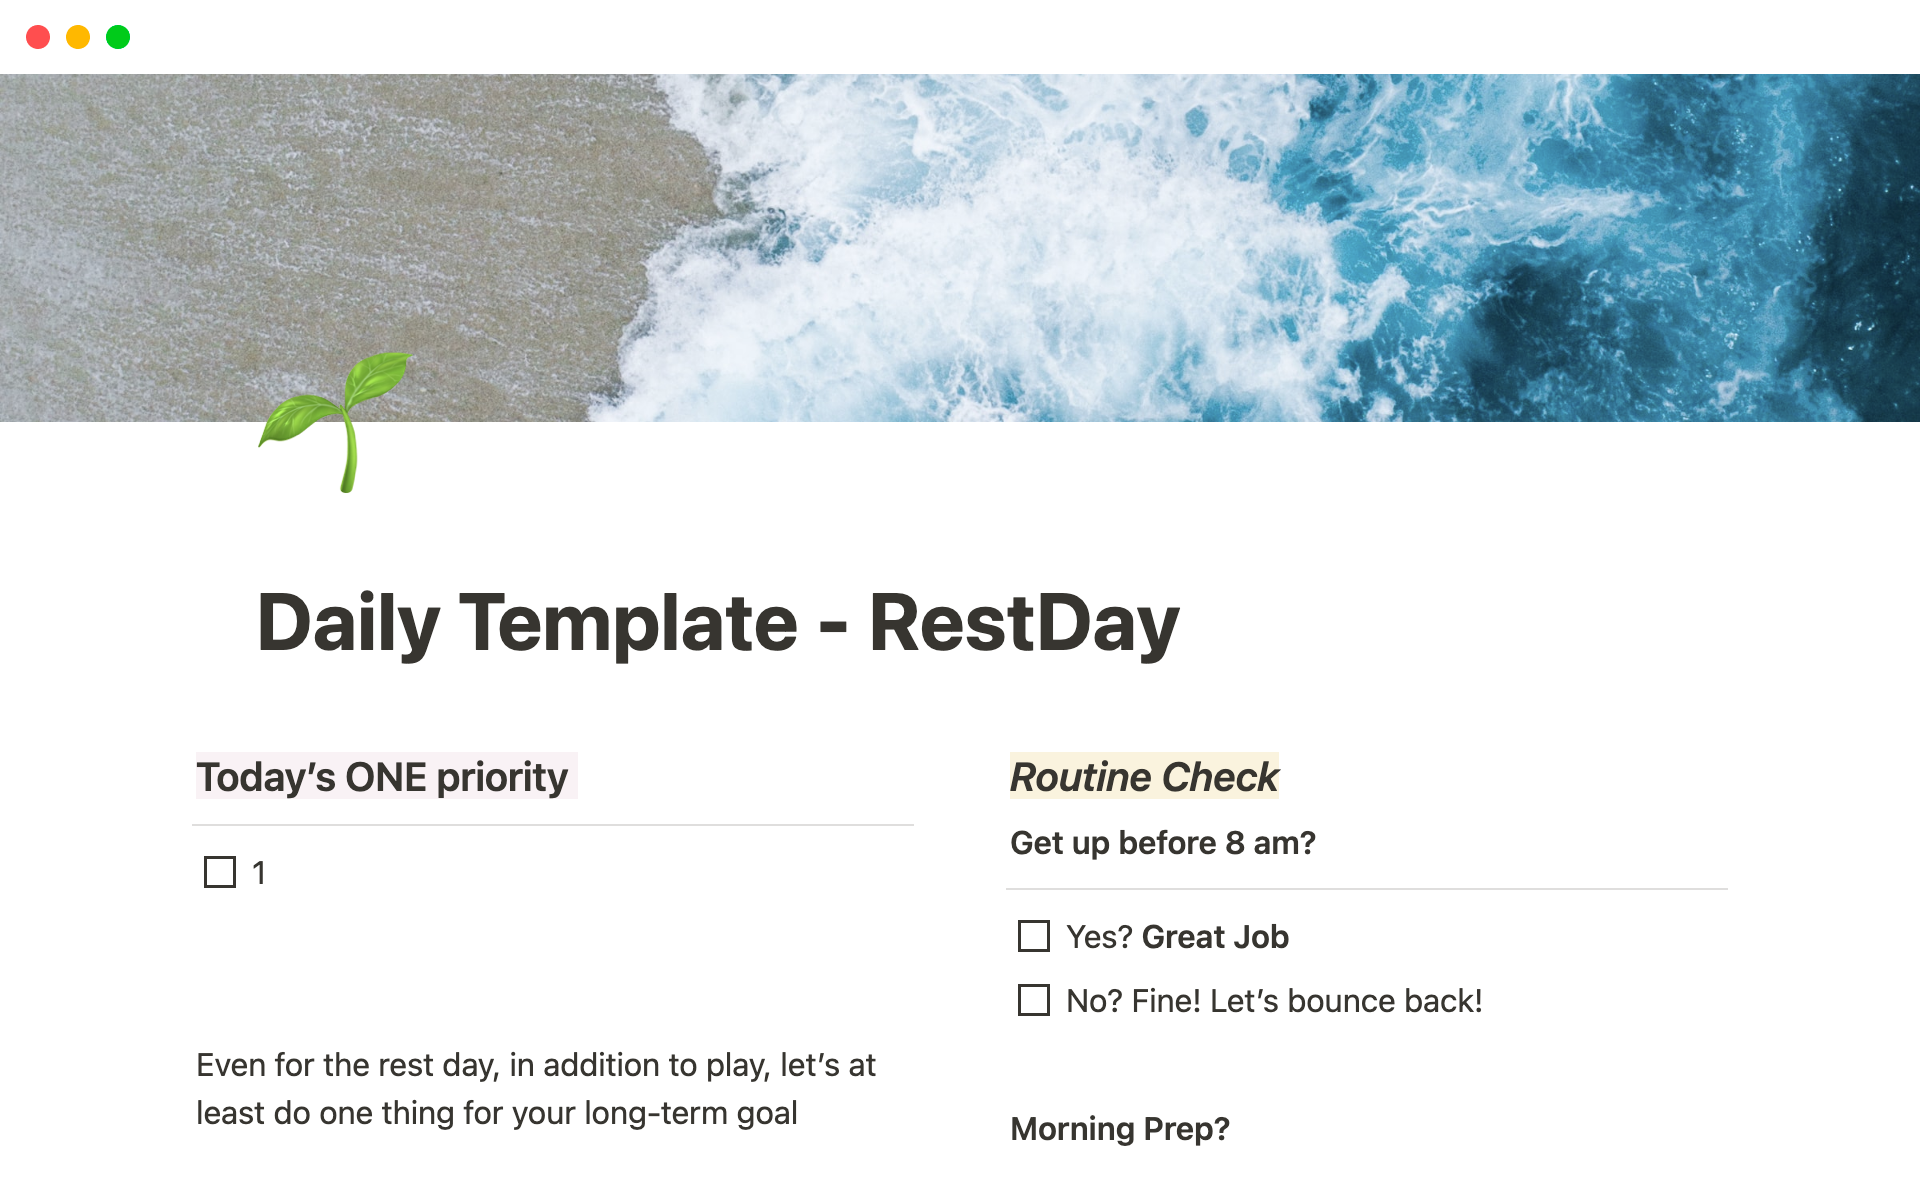 This is a rest day type of daily planning template.